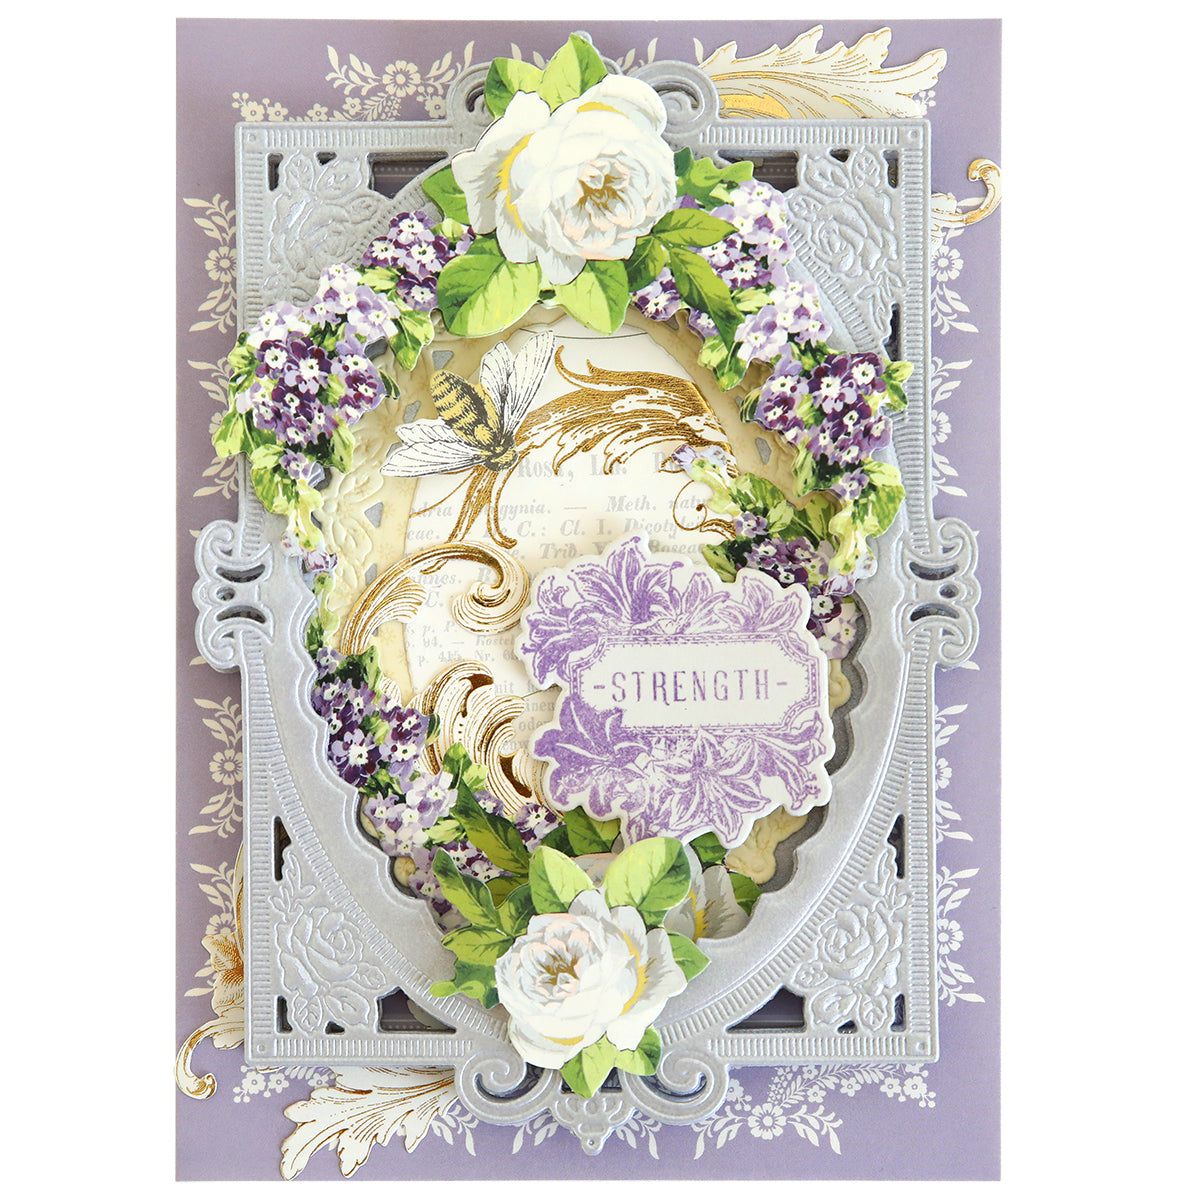 An ornate greeting card featuring a floral wreath design created with Flower Language Stamps and Dies, with white and purple flowers, and the word "strength" prominently displayed in the center on a purple label.